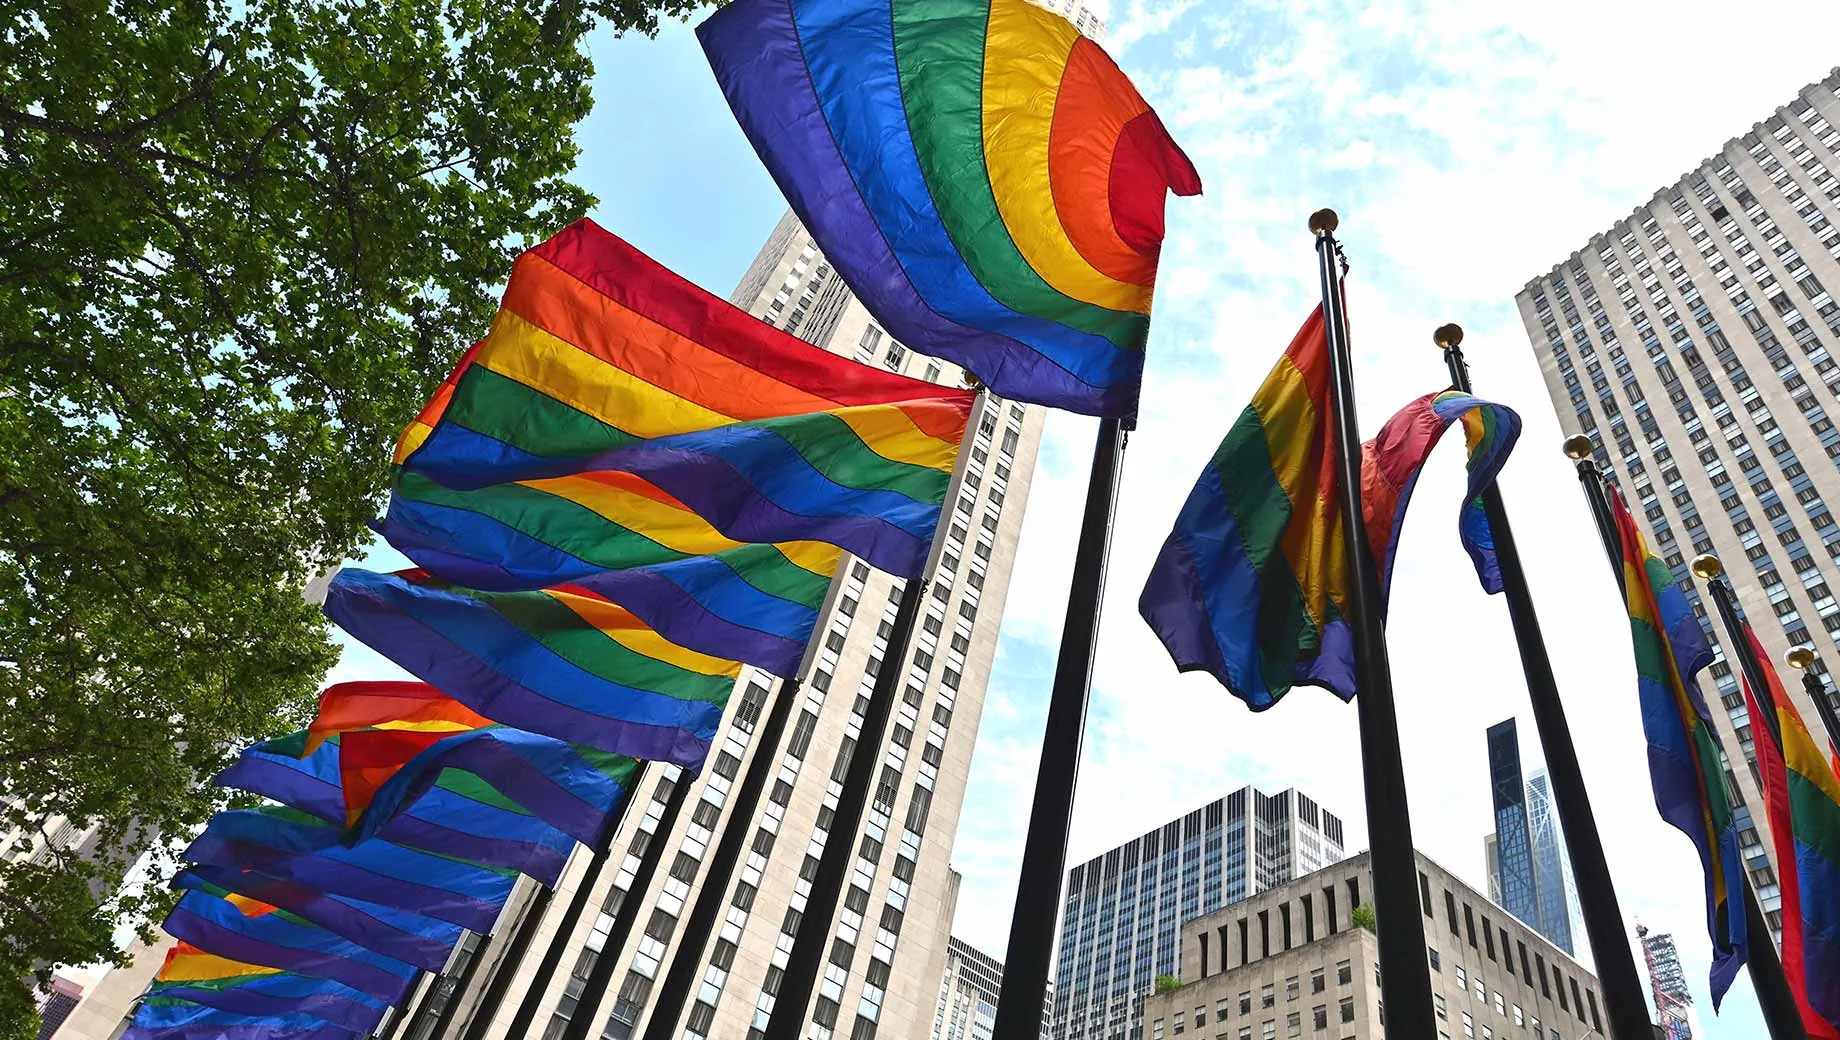 Washington, D.C., the capital of the United States, has the highest estimated percentage of LGBT